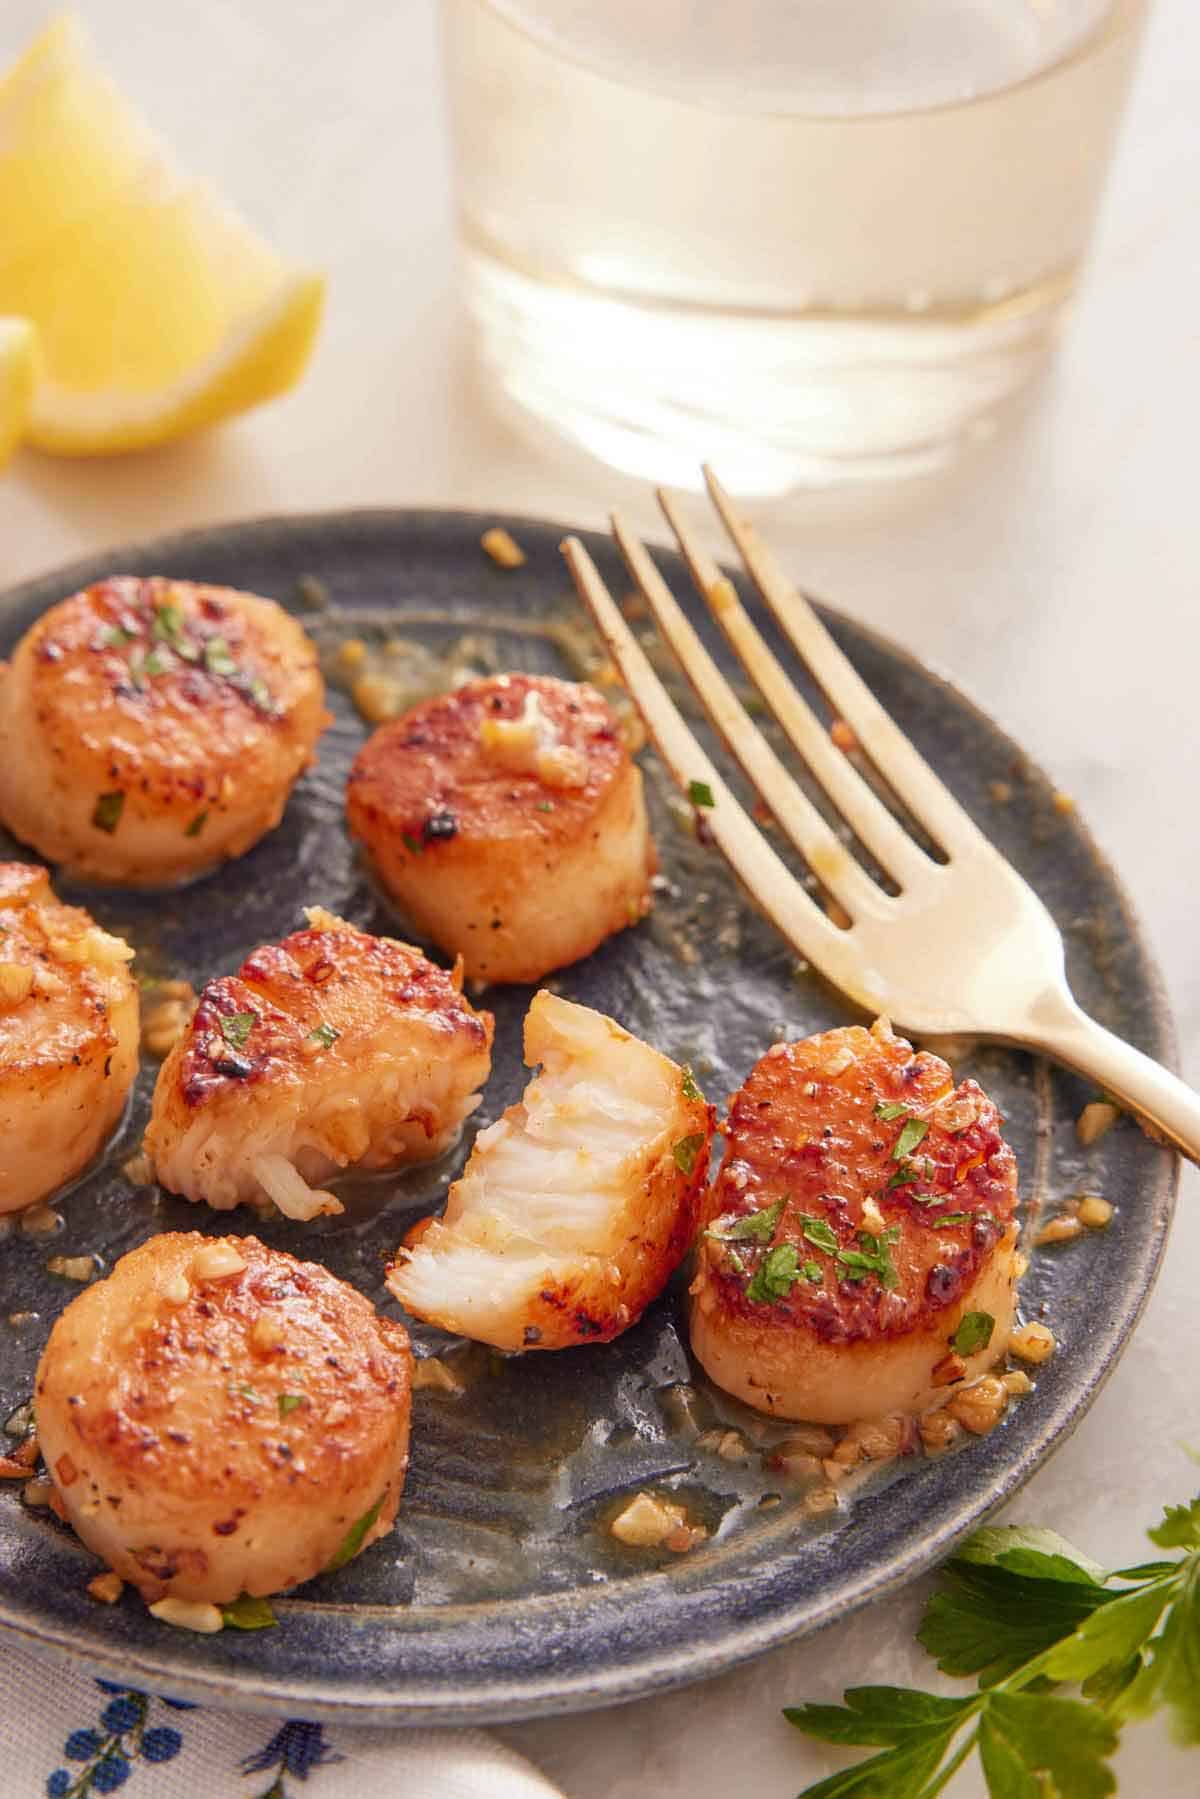 A plate with a serving of seared scallops with one cut in half and a fork on the plate.